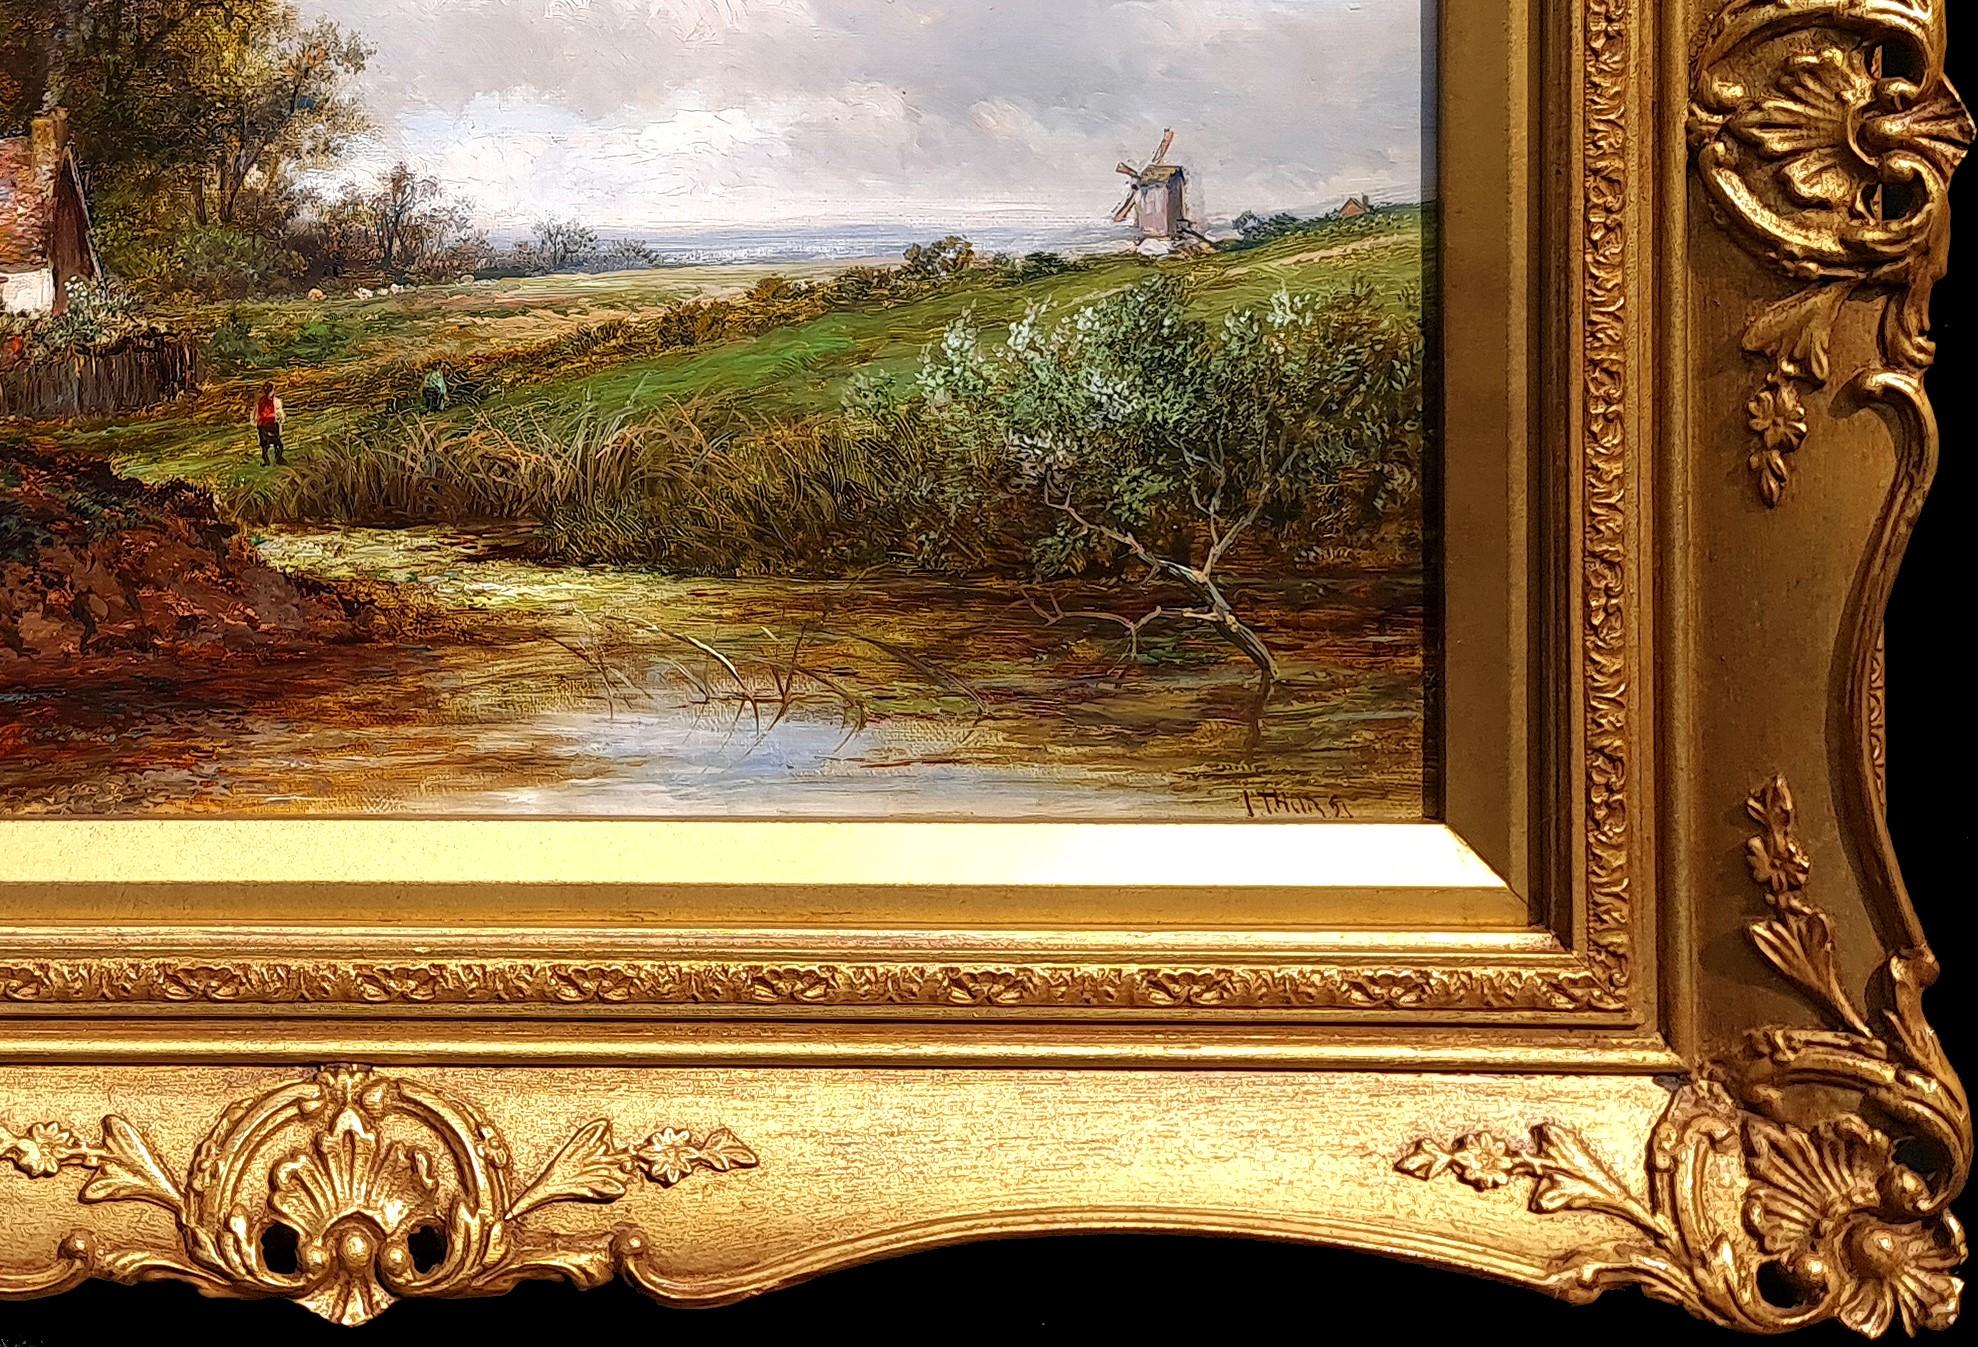 Gathering Hay - Brown Landscape Painting by Joseph Thors